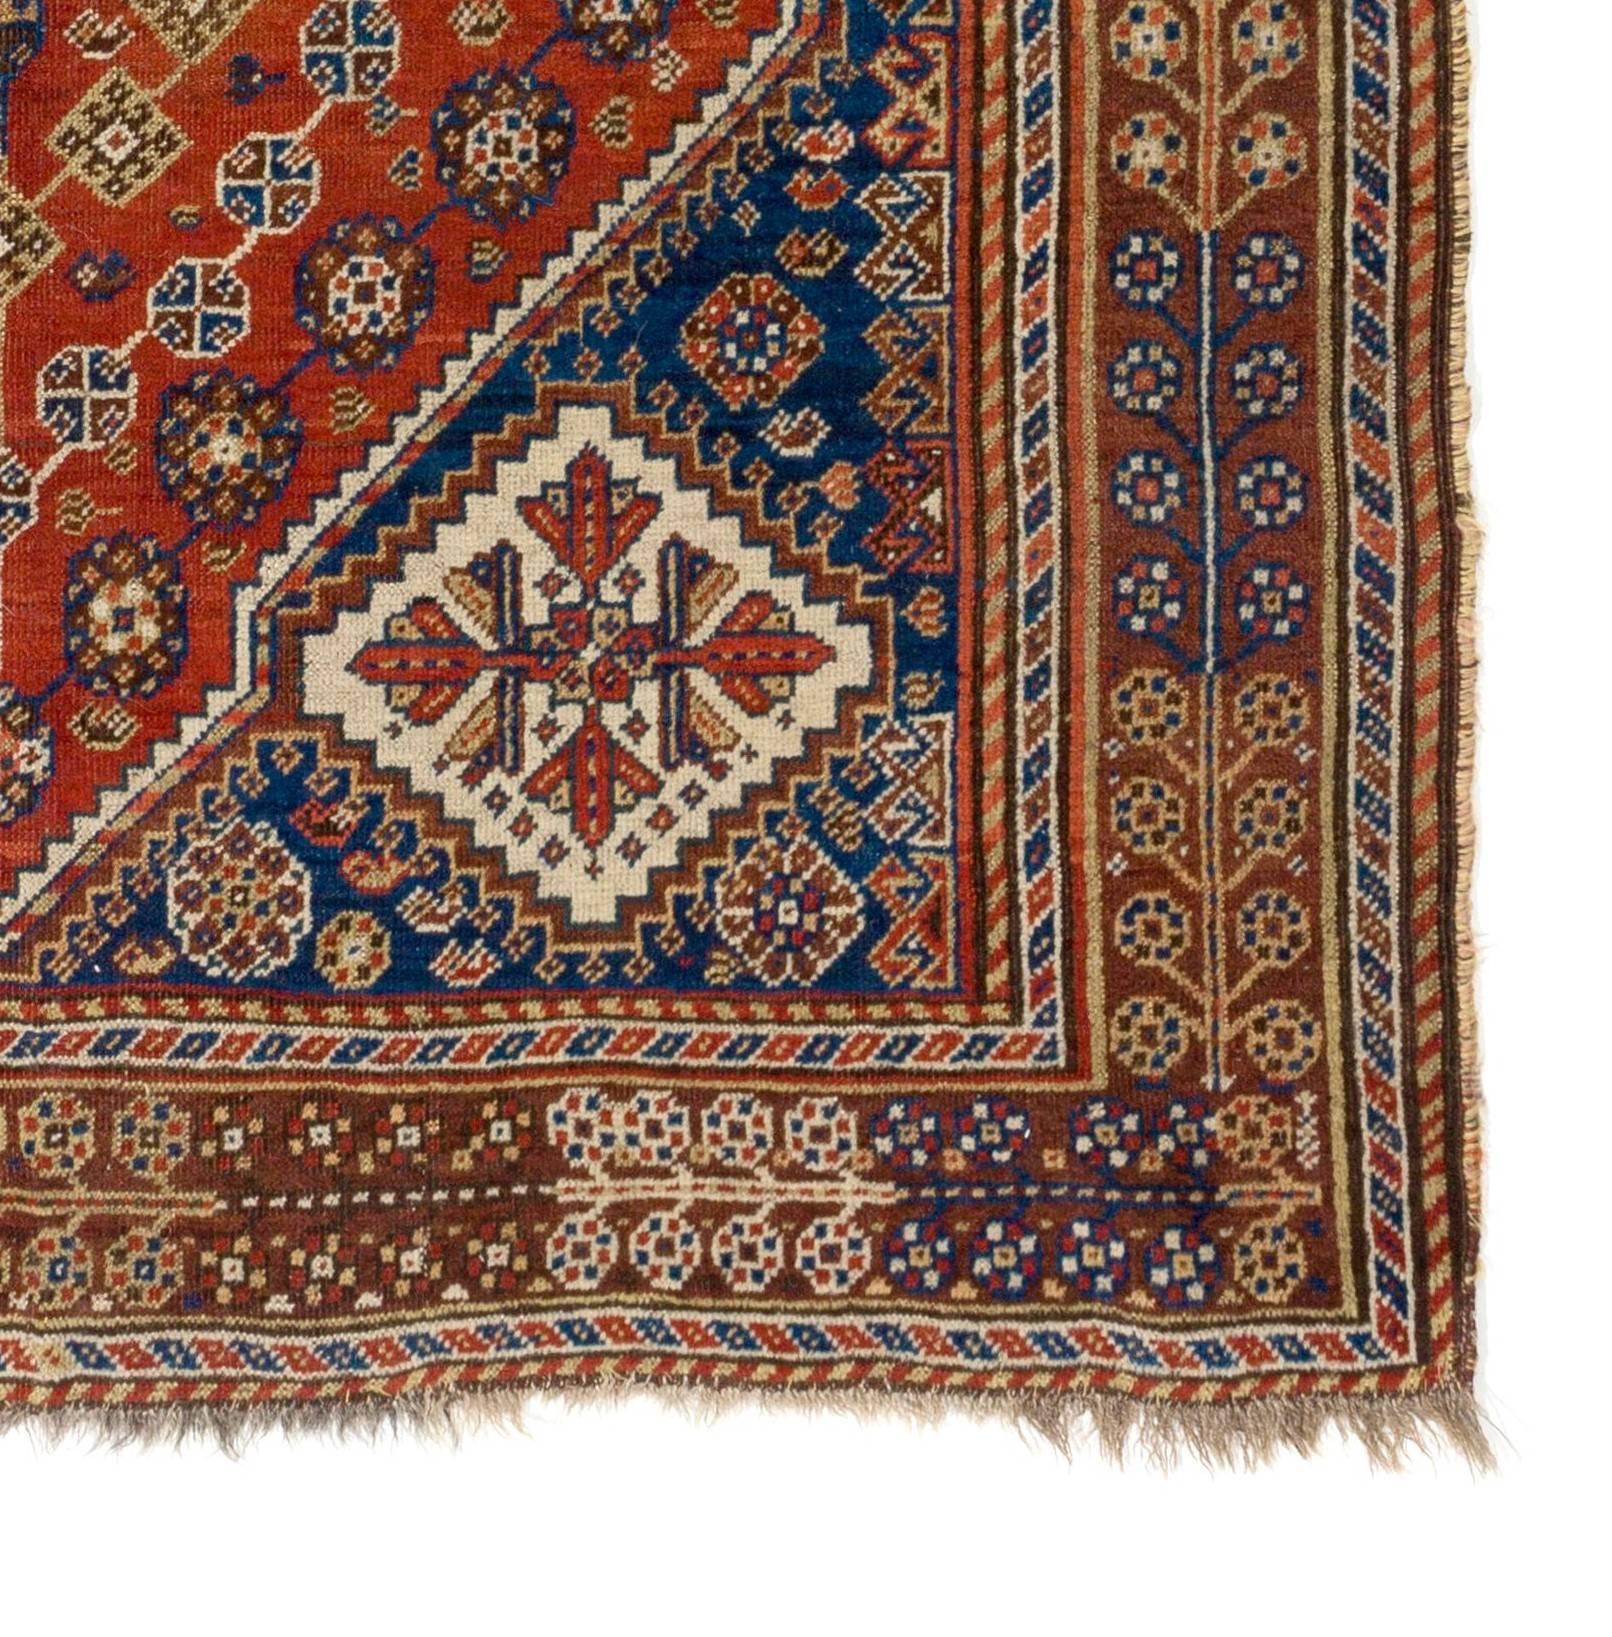 Tribal 4.6x6.6 Ft Antique Persian Shiraz Qashqai Rug. All Wool & Natural Vegetable Dyes For Sale